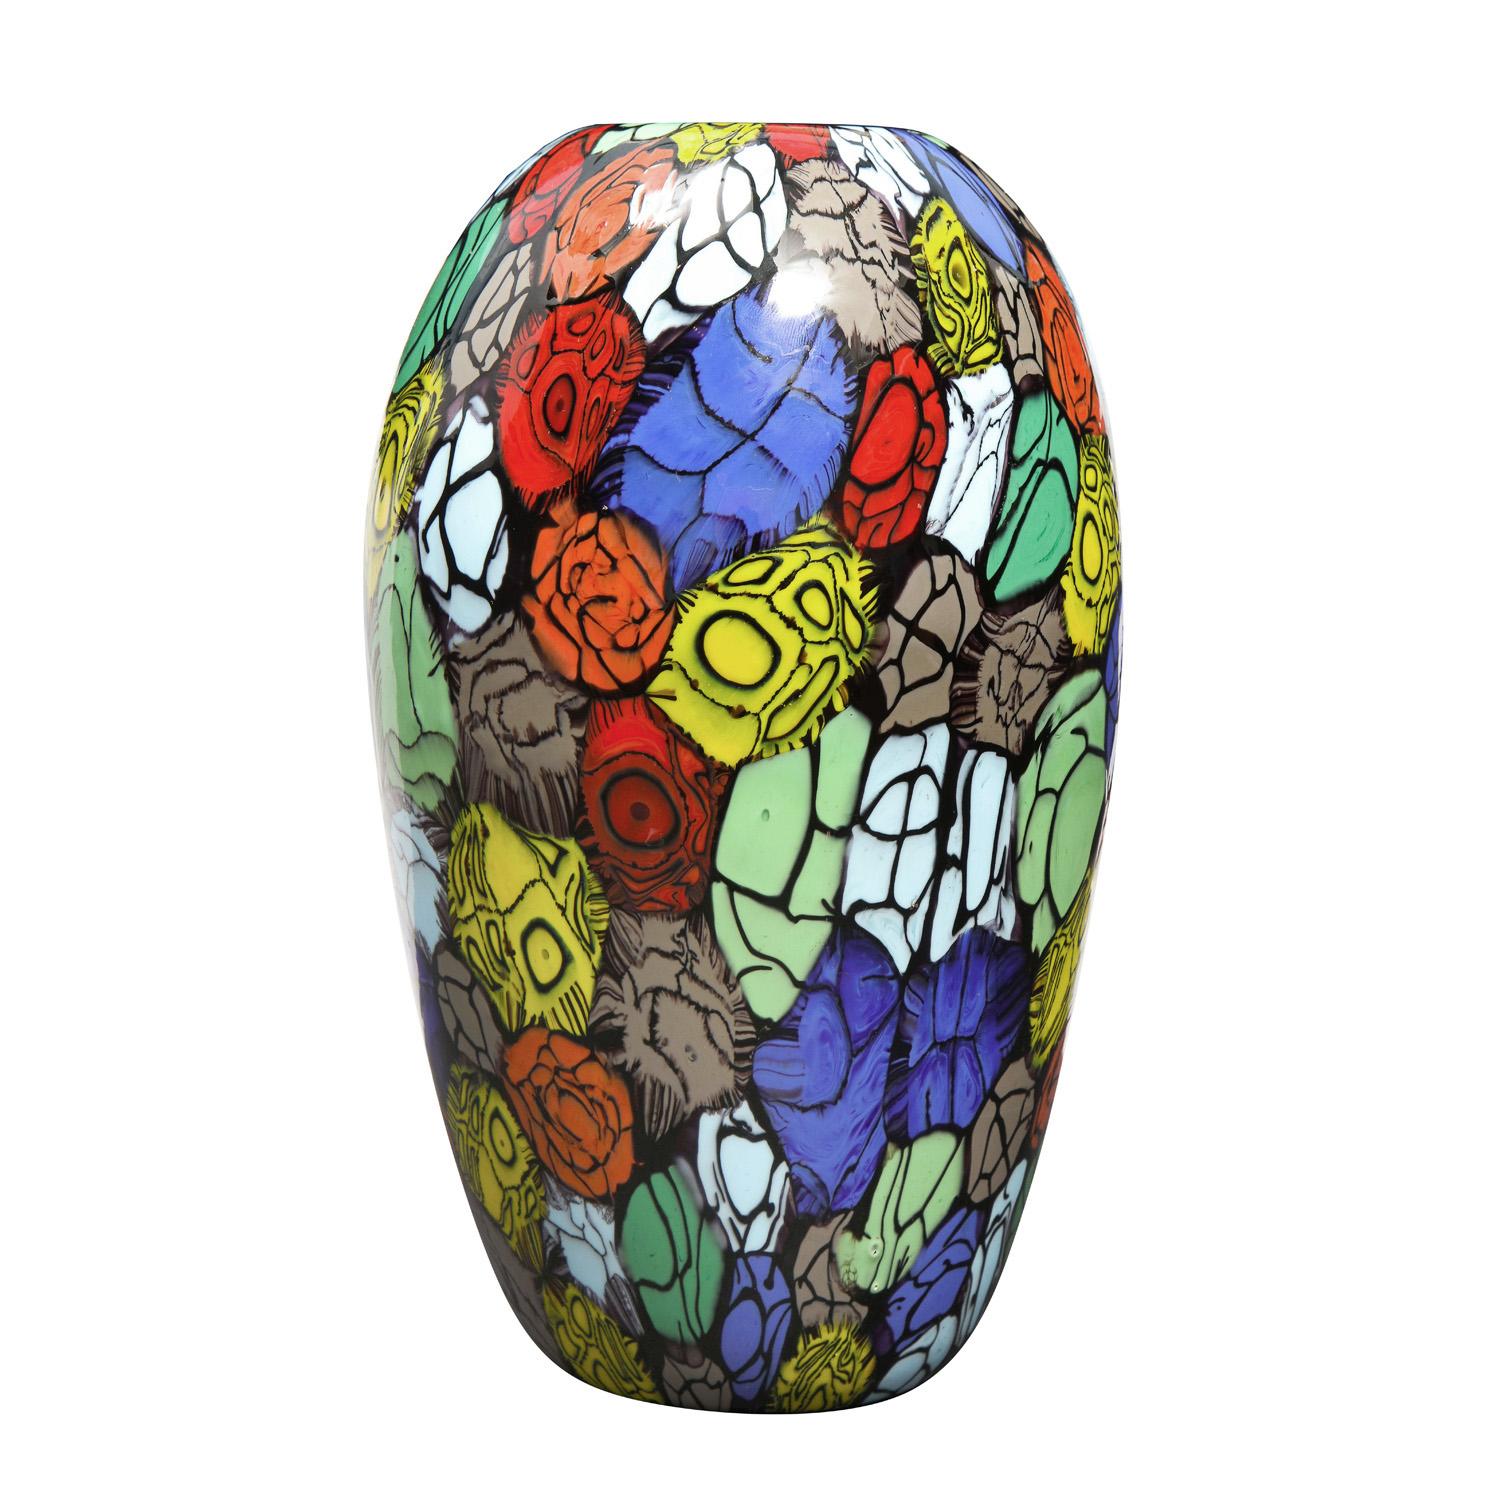 Hand-blown glass vase with unique red, gree, blue, black and taupe murrine by Vittorio Ferro, Murano Italy, 1994 (signed on bottom “Vittorio Ferro ‘94”). Born in 1932, Vittorio Ferro was a first rate glass master who spent many years working at